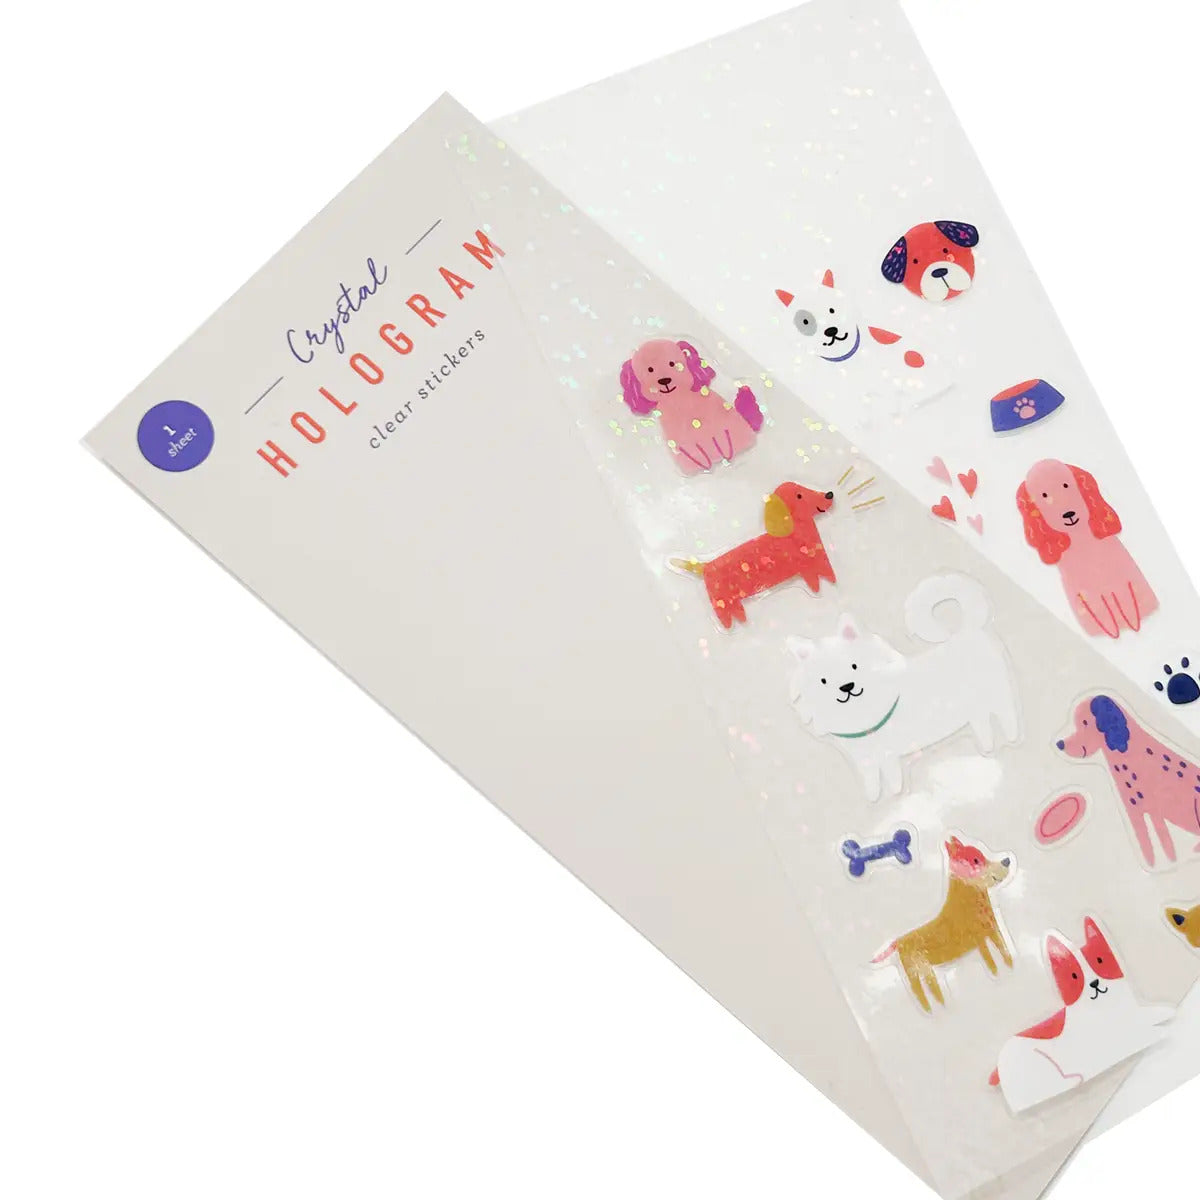 Girl of All Work - Dogs Crystal Hologram Clear Stickers